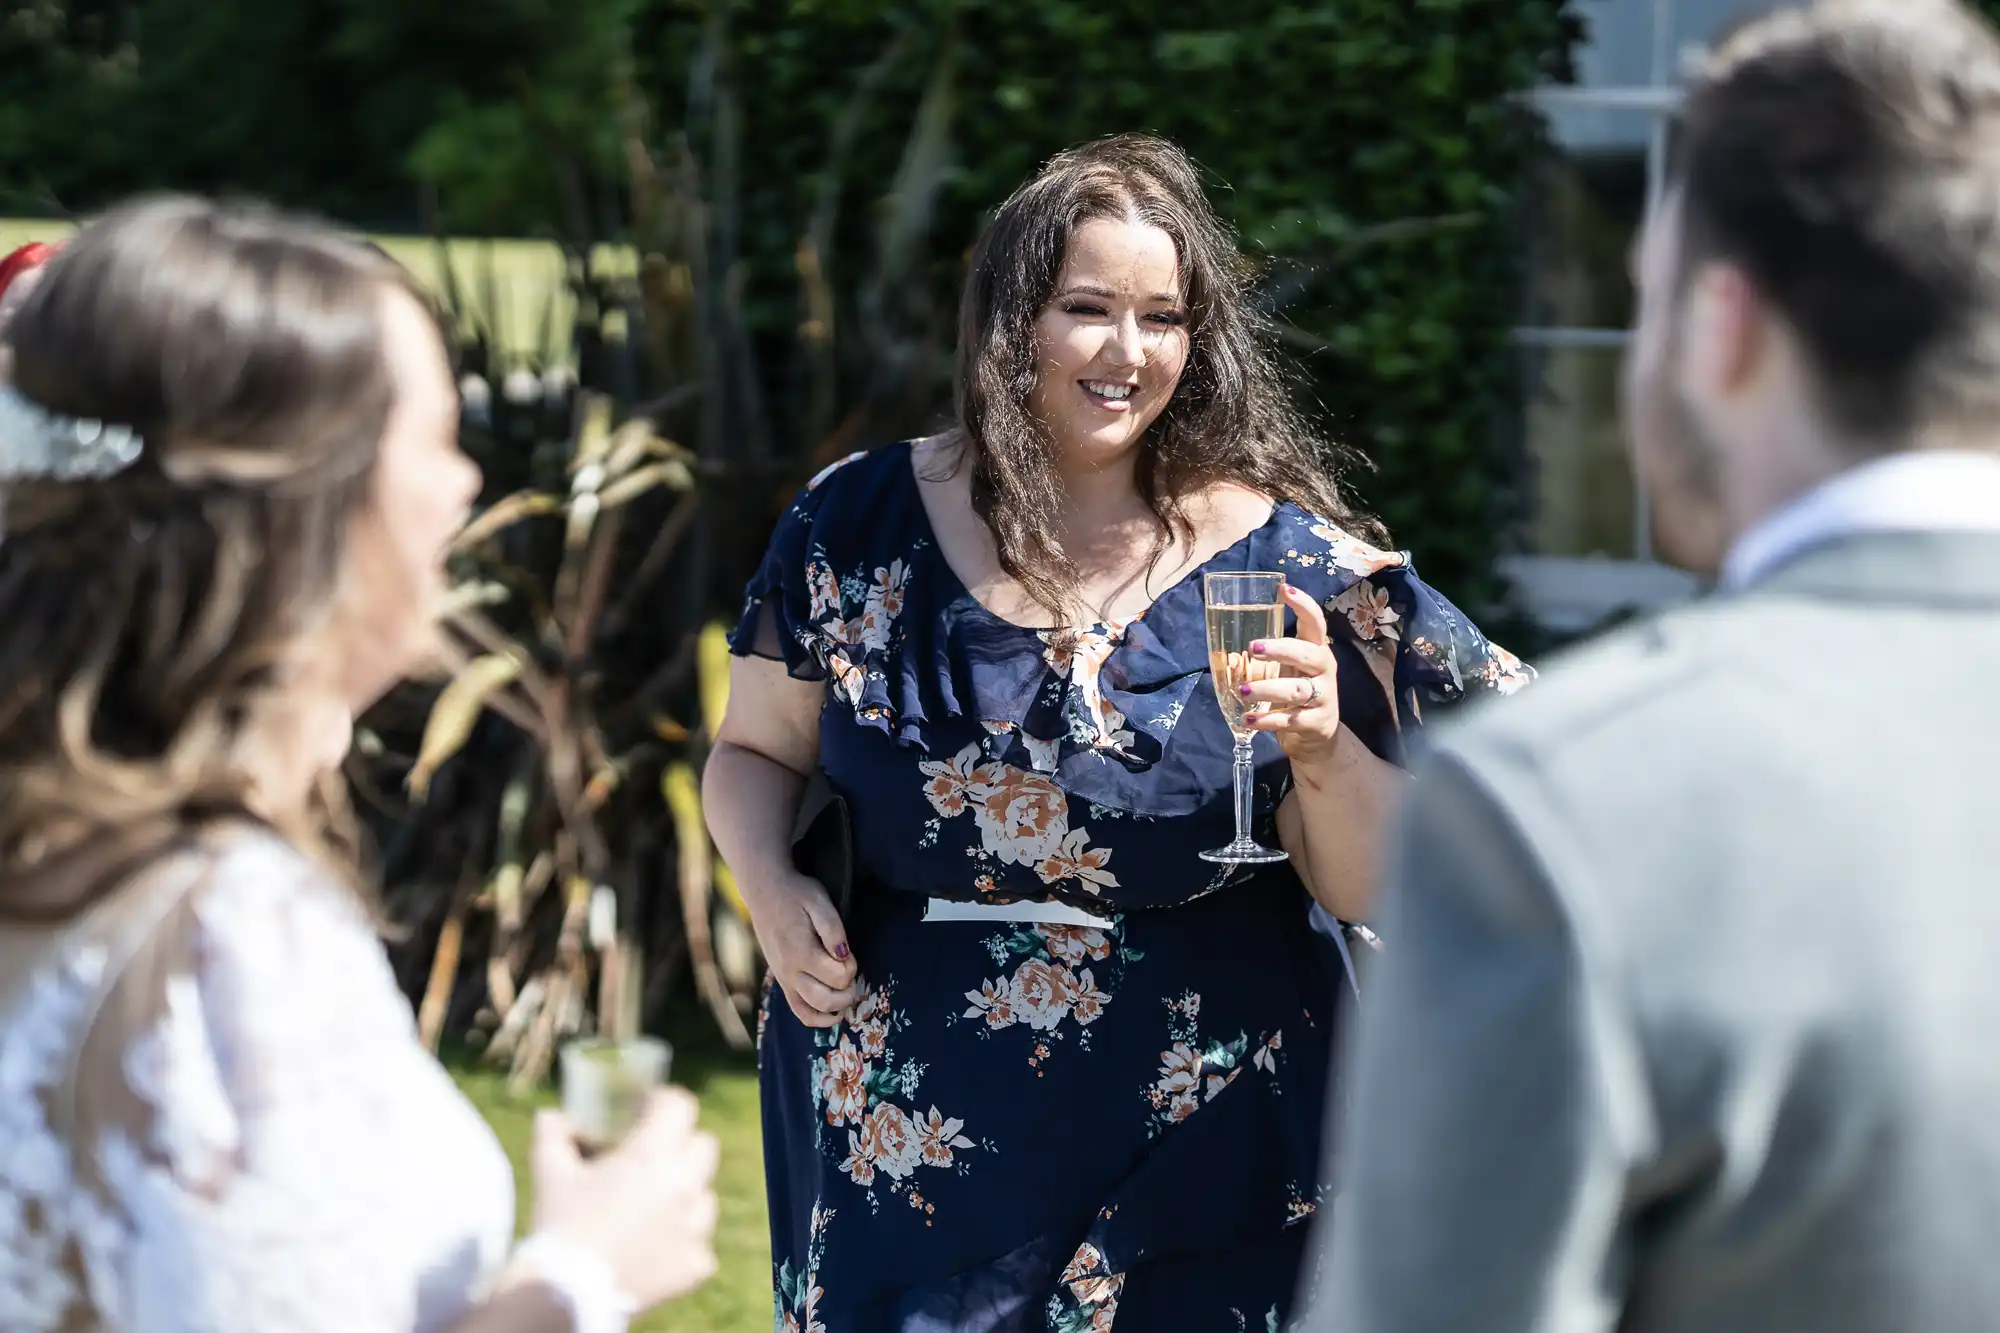 A woman in a floral dress holding a wine glass laughs with other guests at an outdoor gathering.